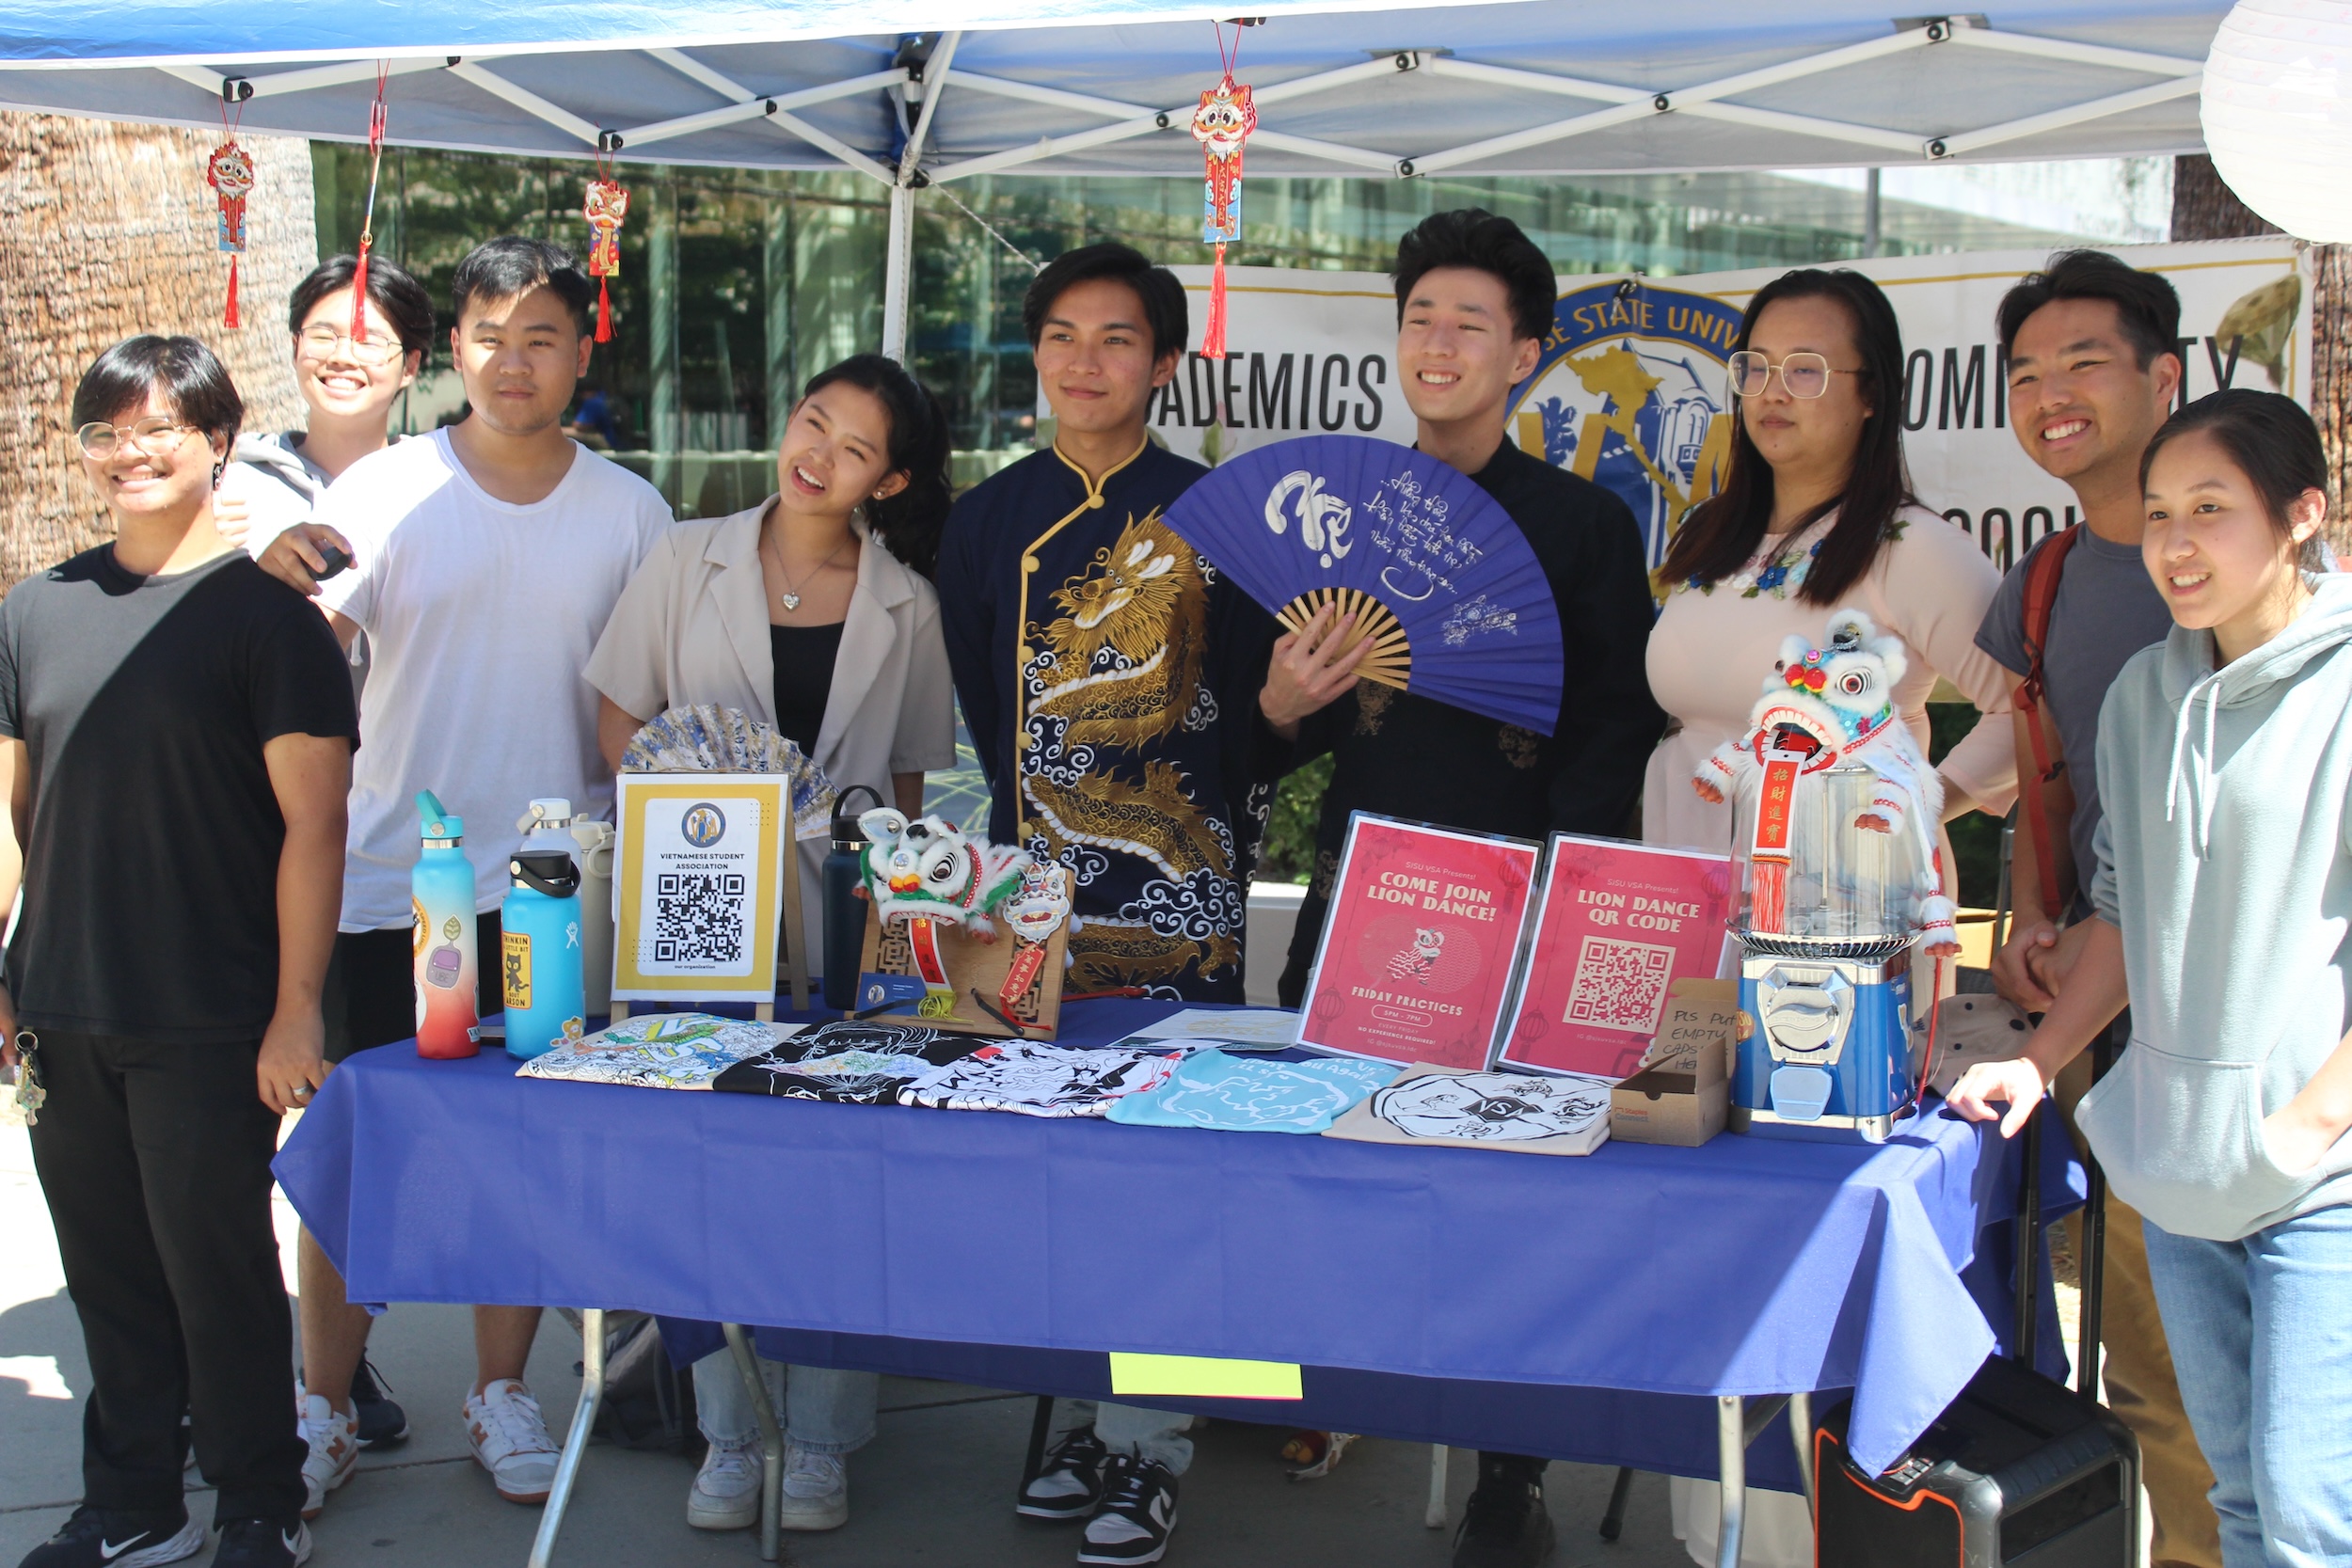 Tabling event for student clubs and organizations.